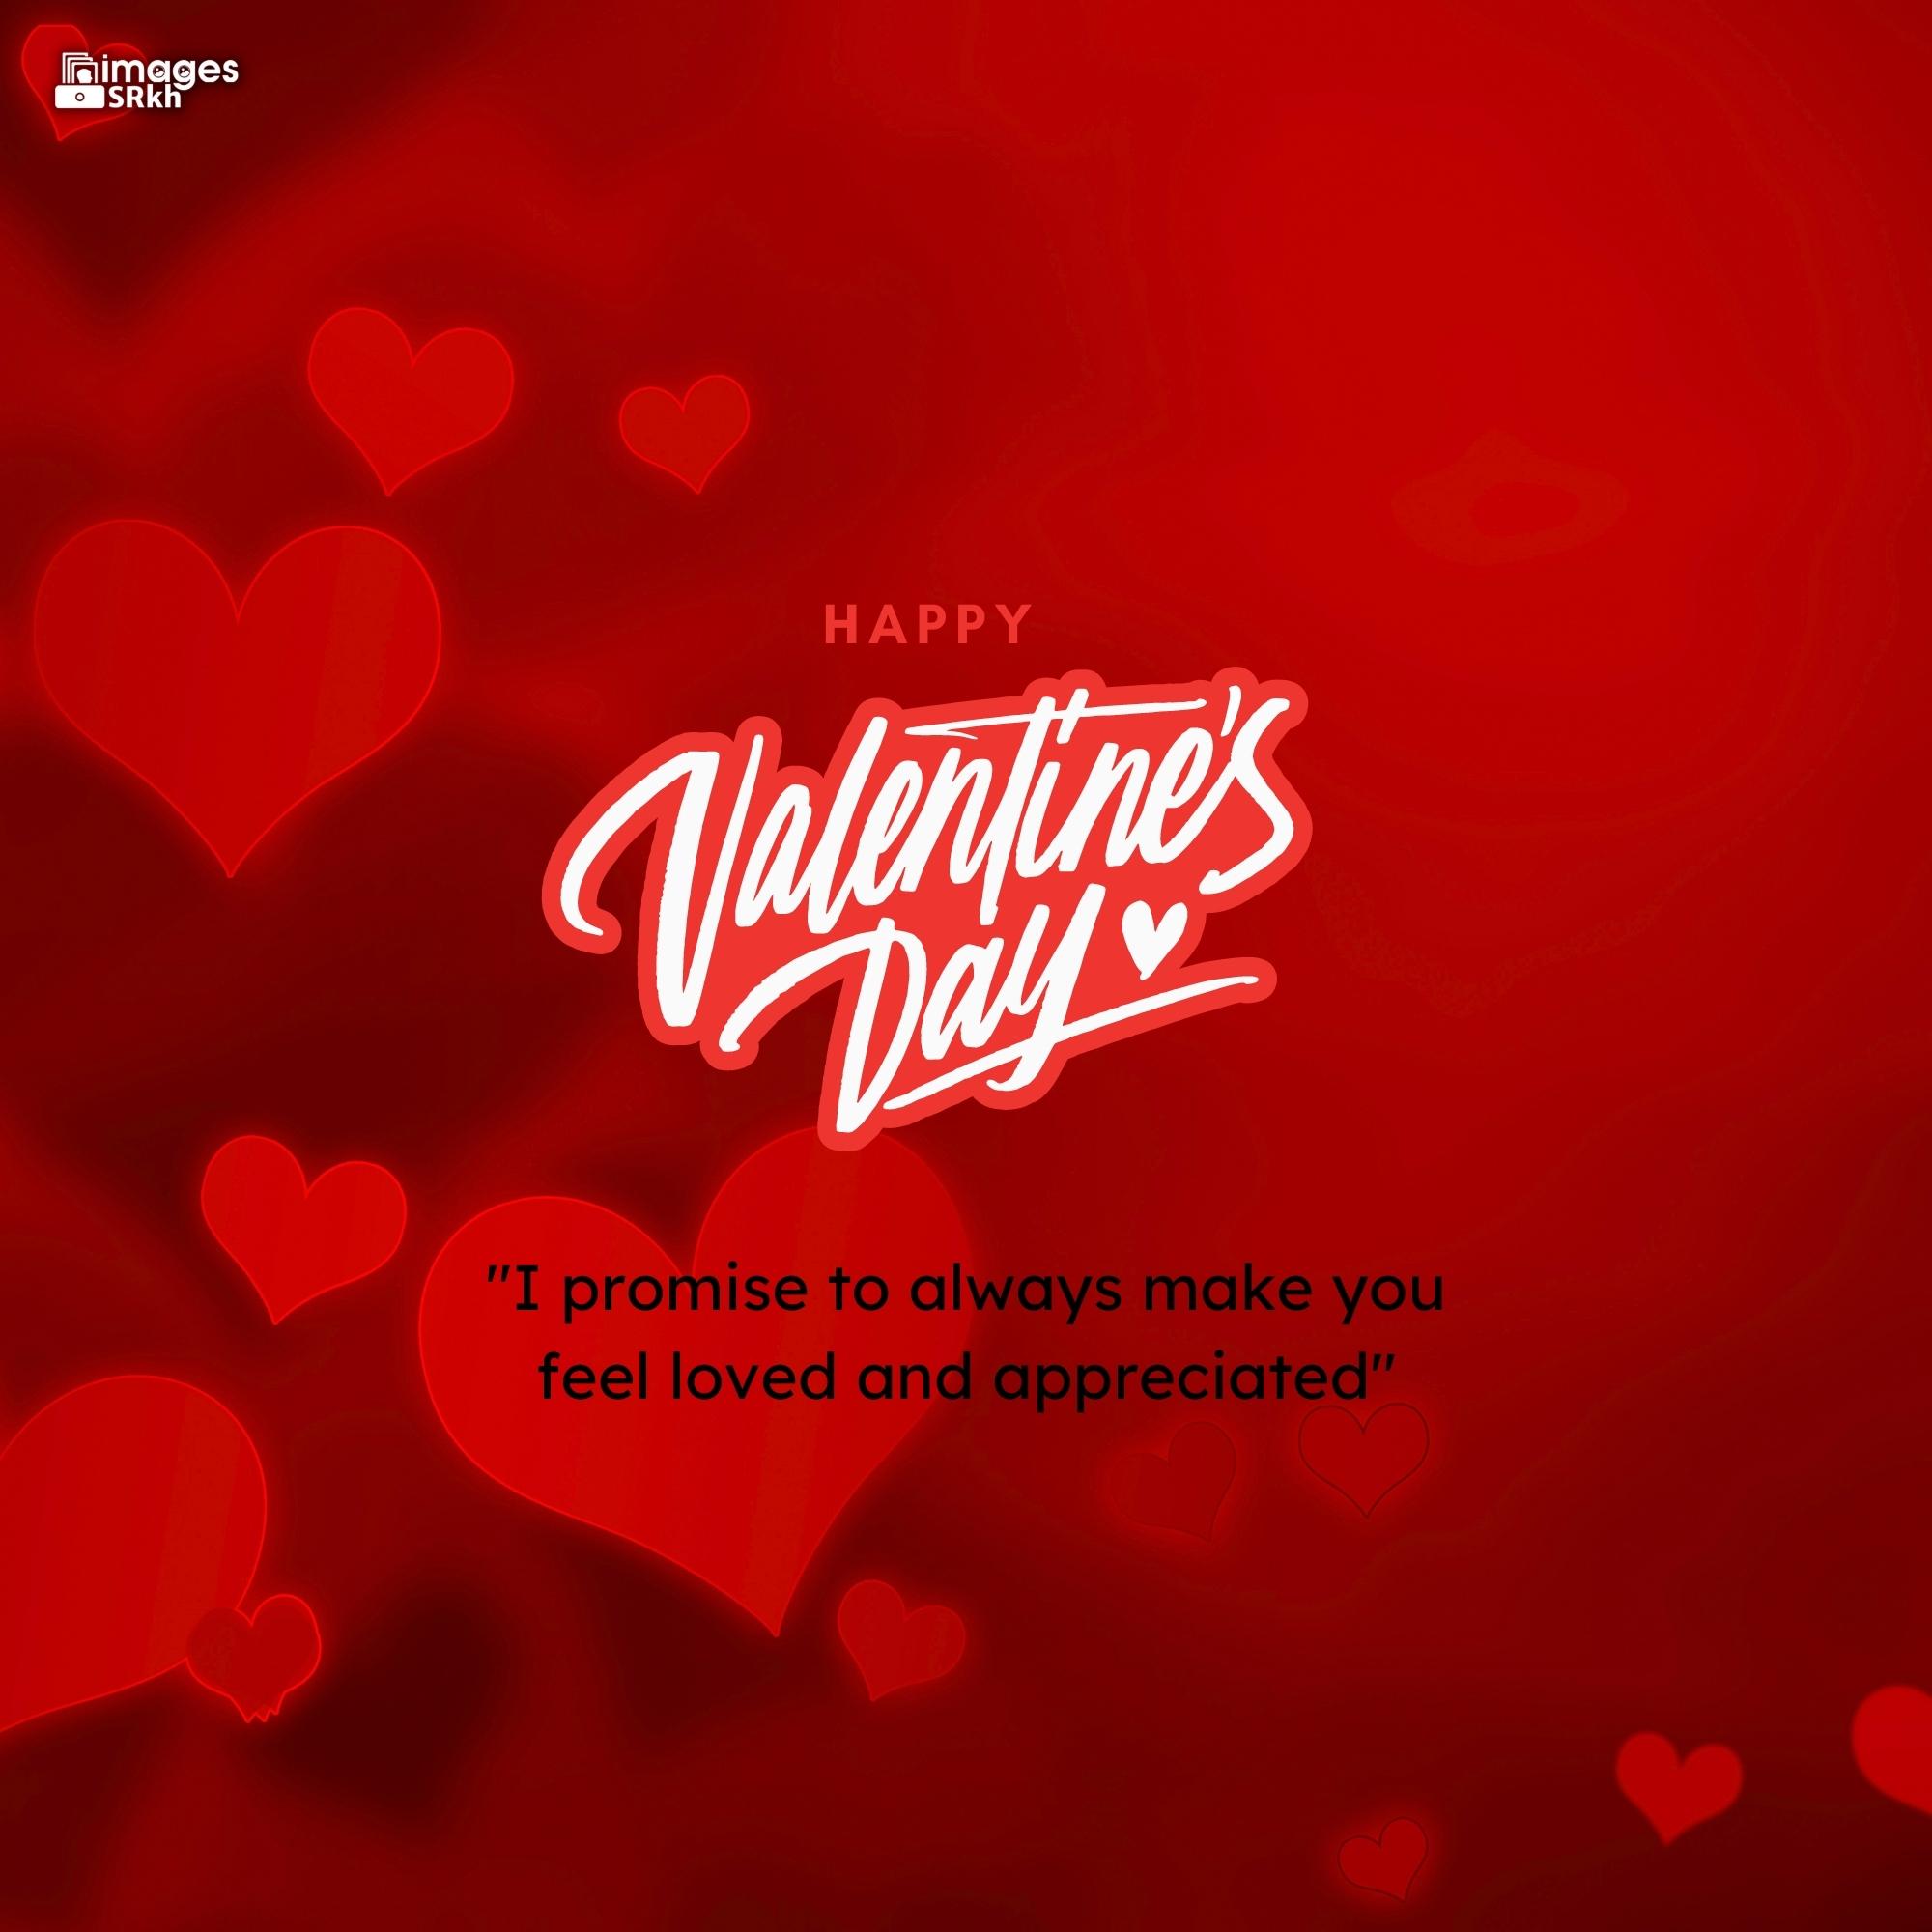 Happy Valentines Day | 518 | PREMIUM IMAGES | Wishes for Love